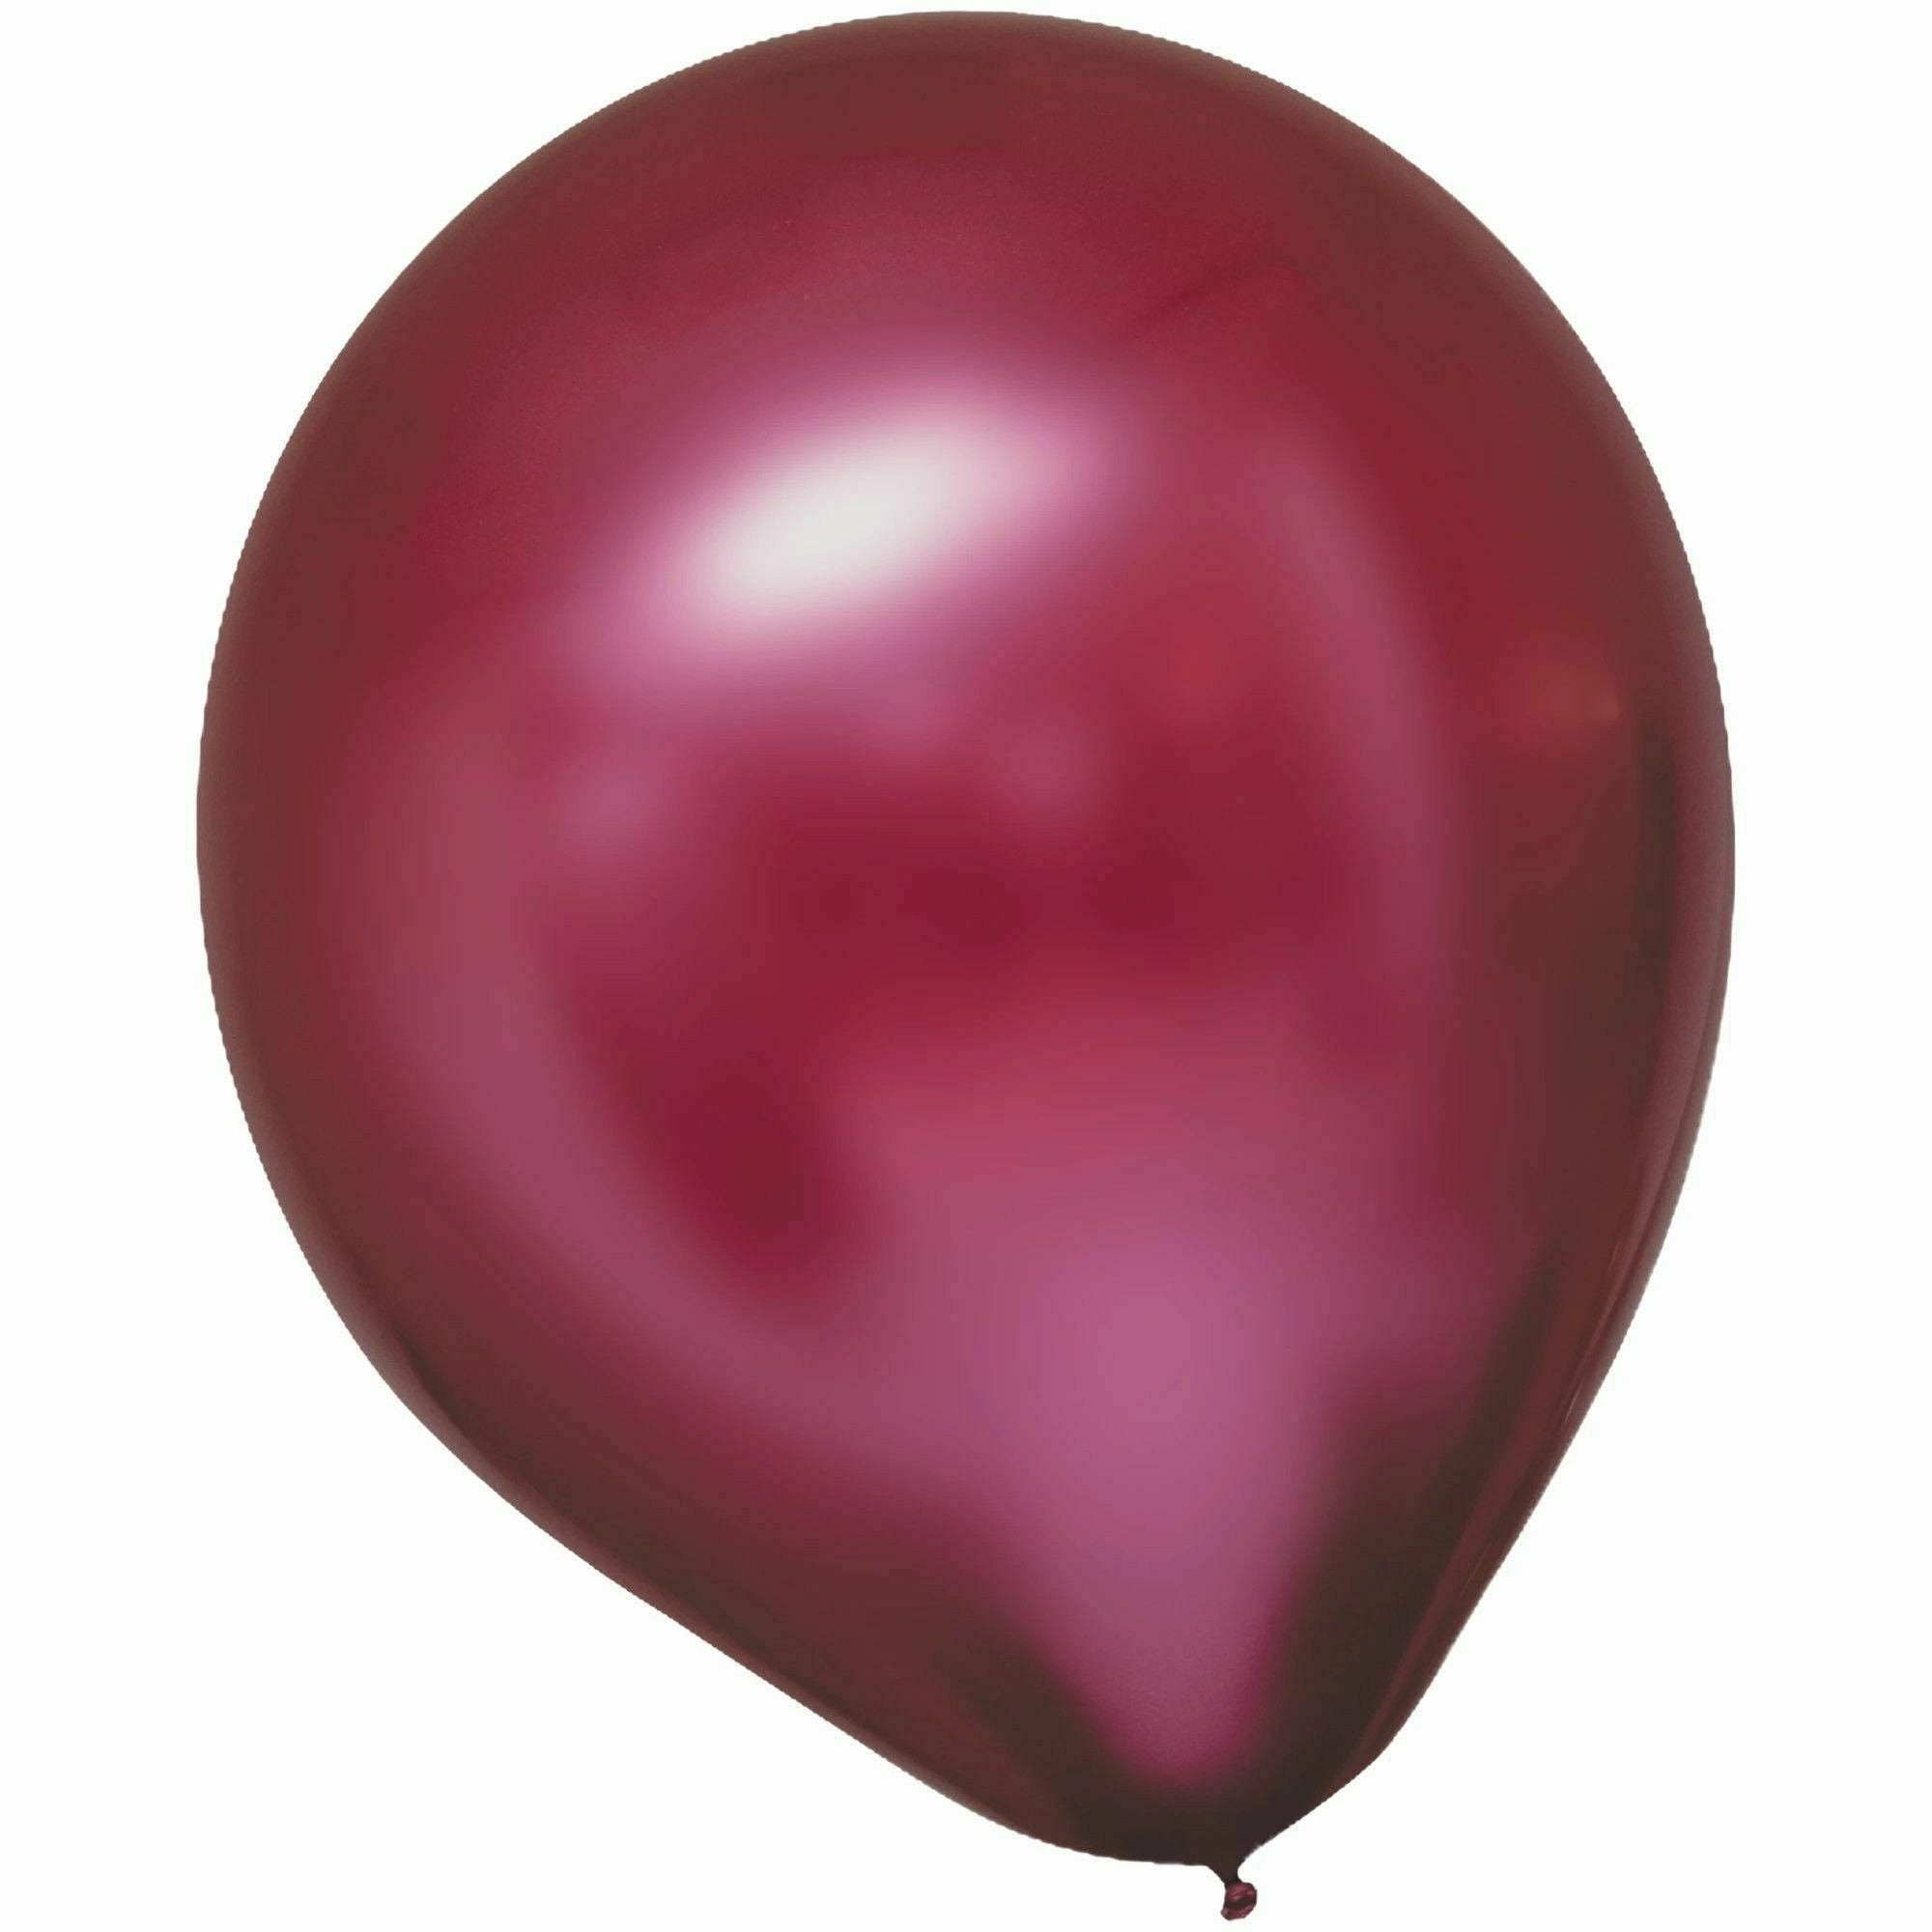 Amscan BALLOONS Pomegranate Satin Luxe / Helium Filled Satin Luxe Latex Balloons 6ct, 11"